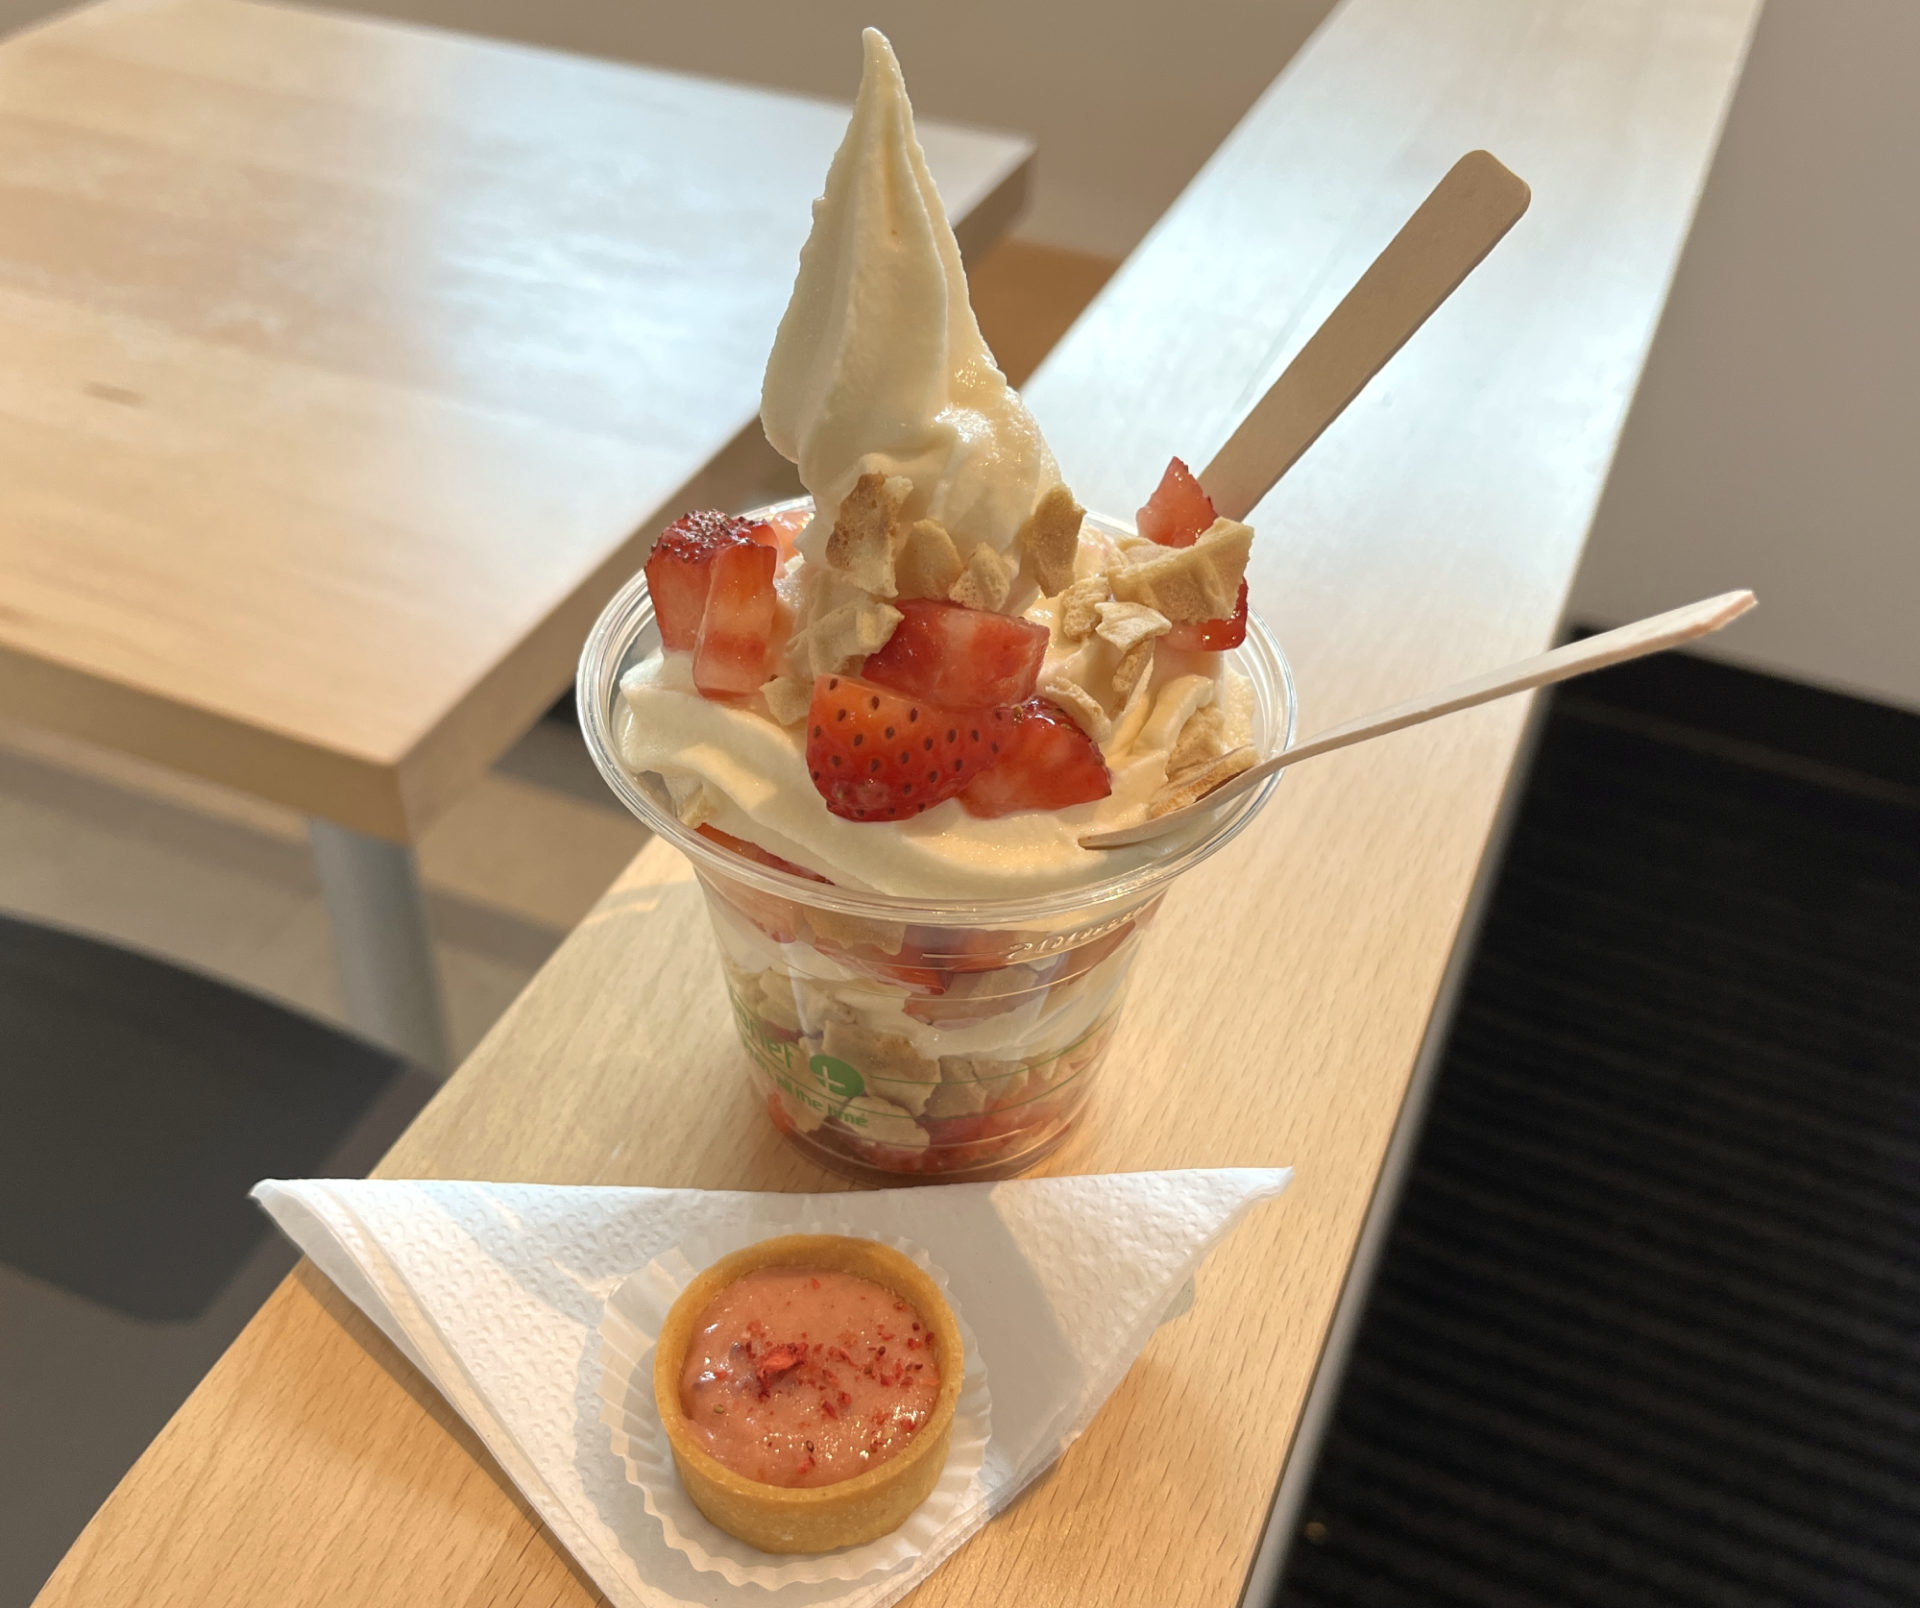 A soft serve ice cream parfait in a cup has waffle cone and strawberries on it, with two spoons sticking out. Next to it is a strawberry mini tart, with pink filling, resting on a white paper napkin folded into a triangle. Both items are perched on the light wood top of a ledge.